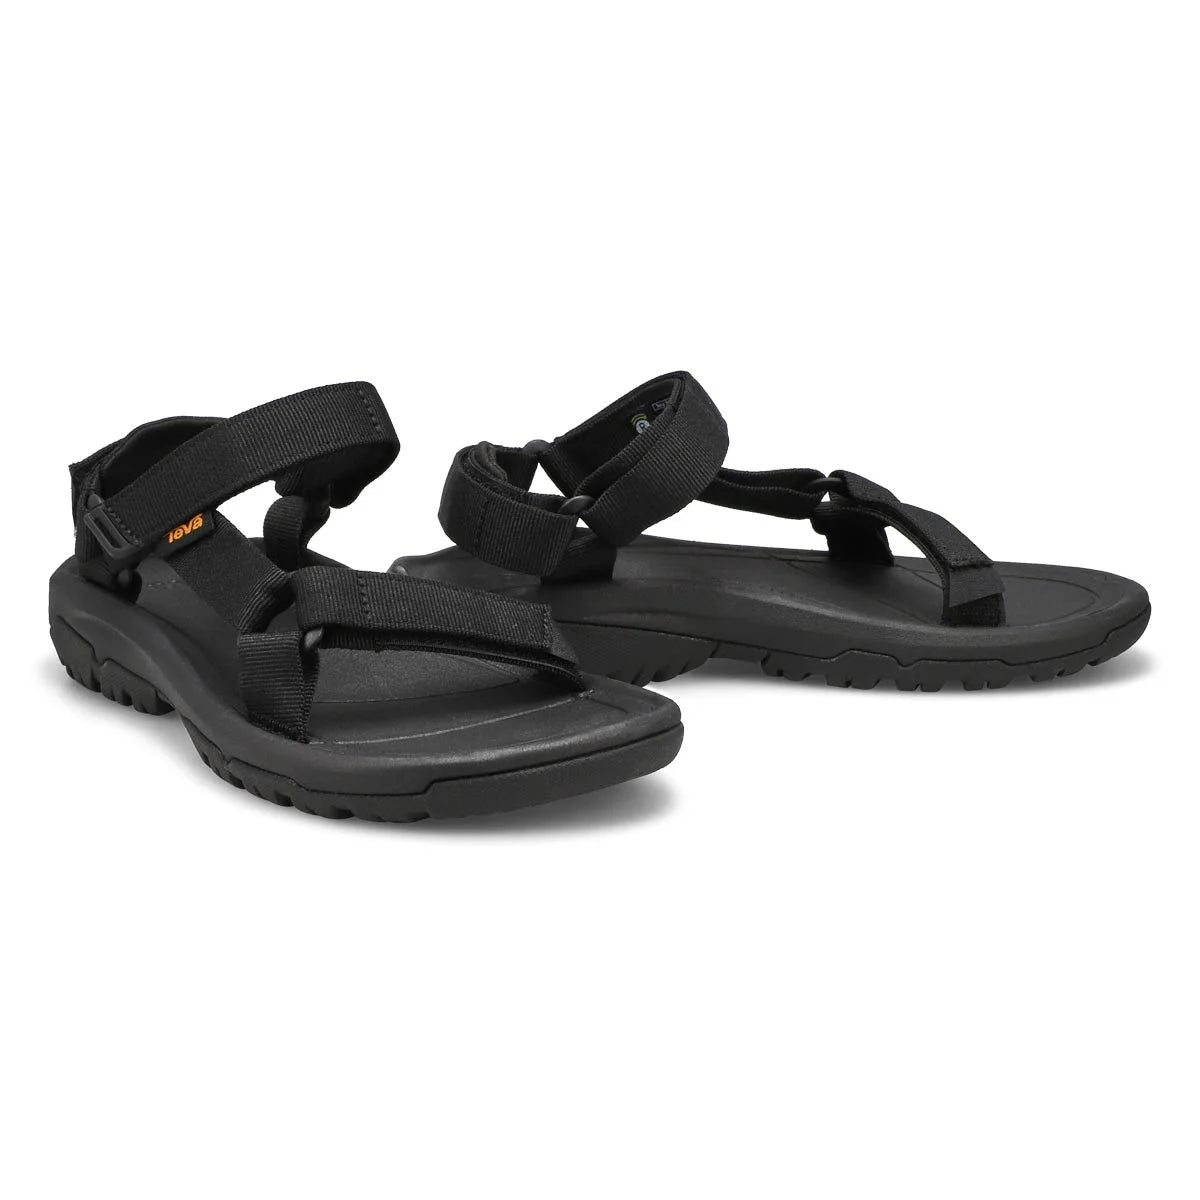 Teva Womens Water-Friendly Sandal - Polyester and nylon construction for water adventures.